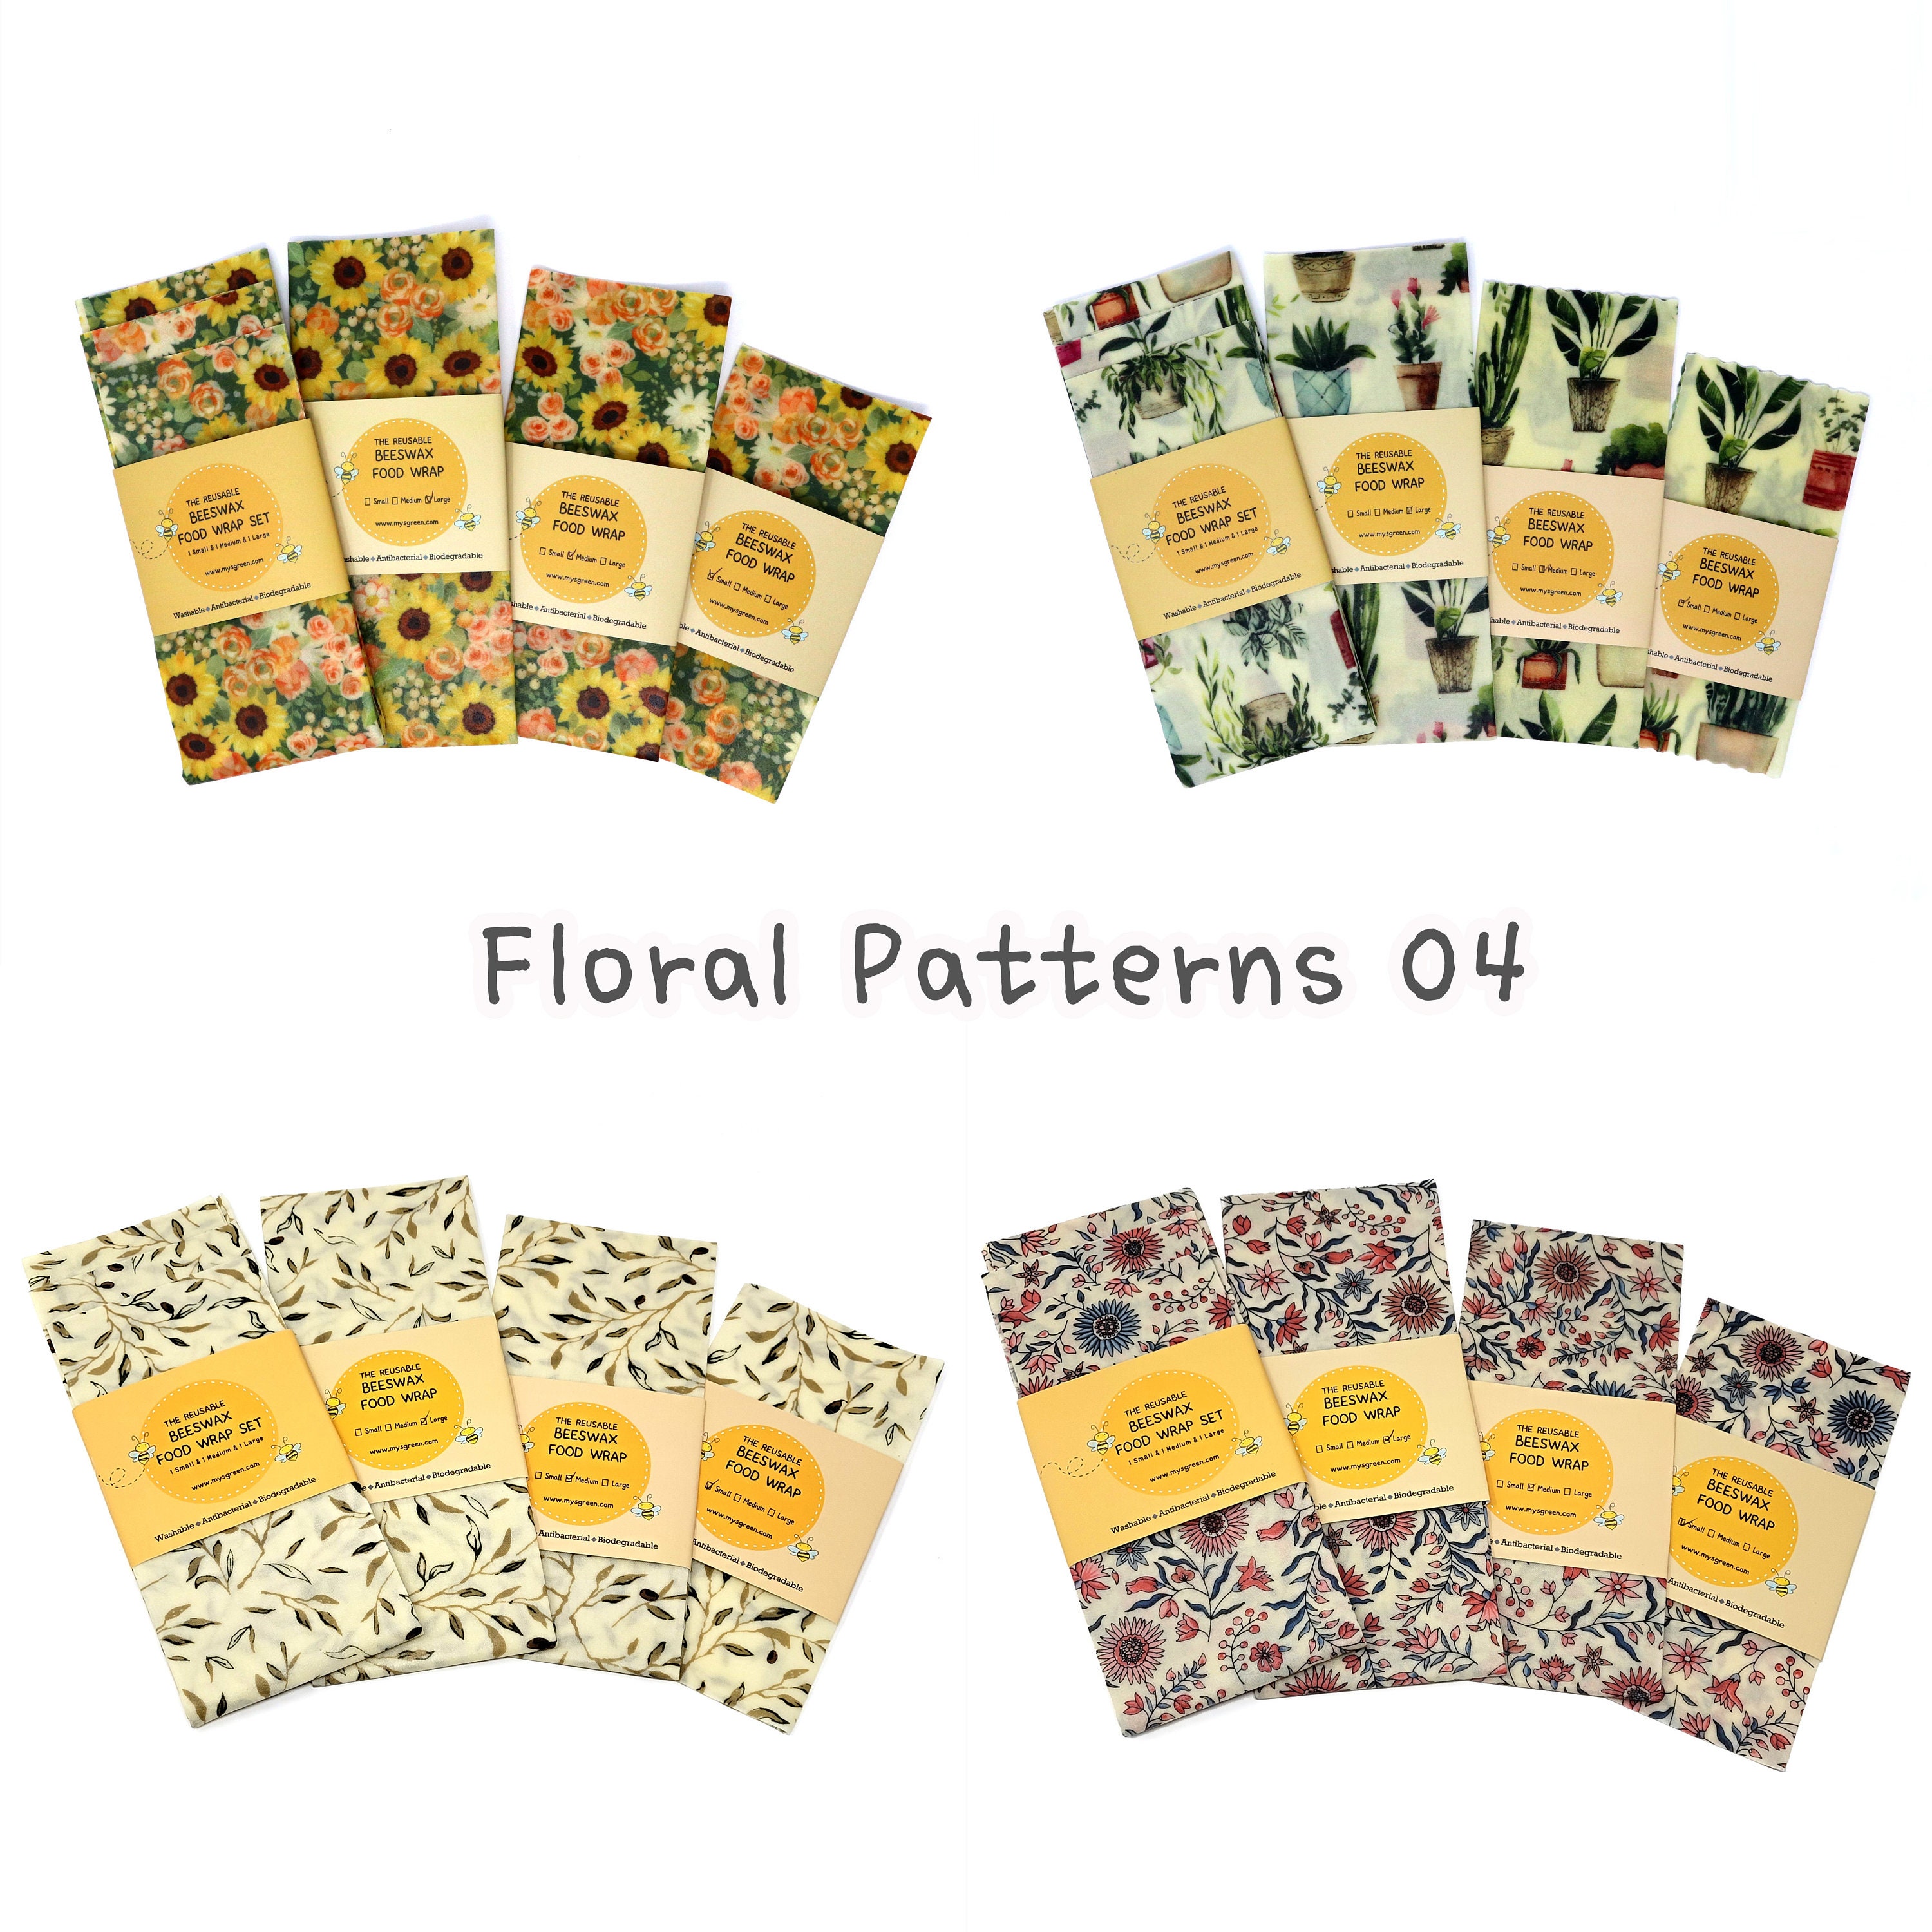 Floral Patterns Beeswax Food Wraps, Reusable Wax Wrap Beeswax